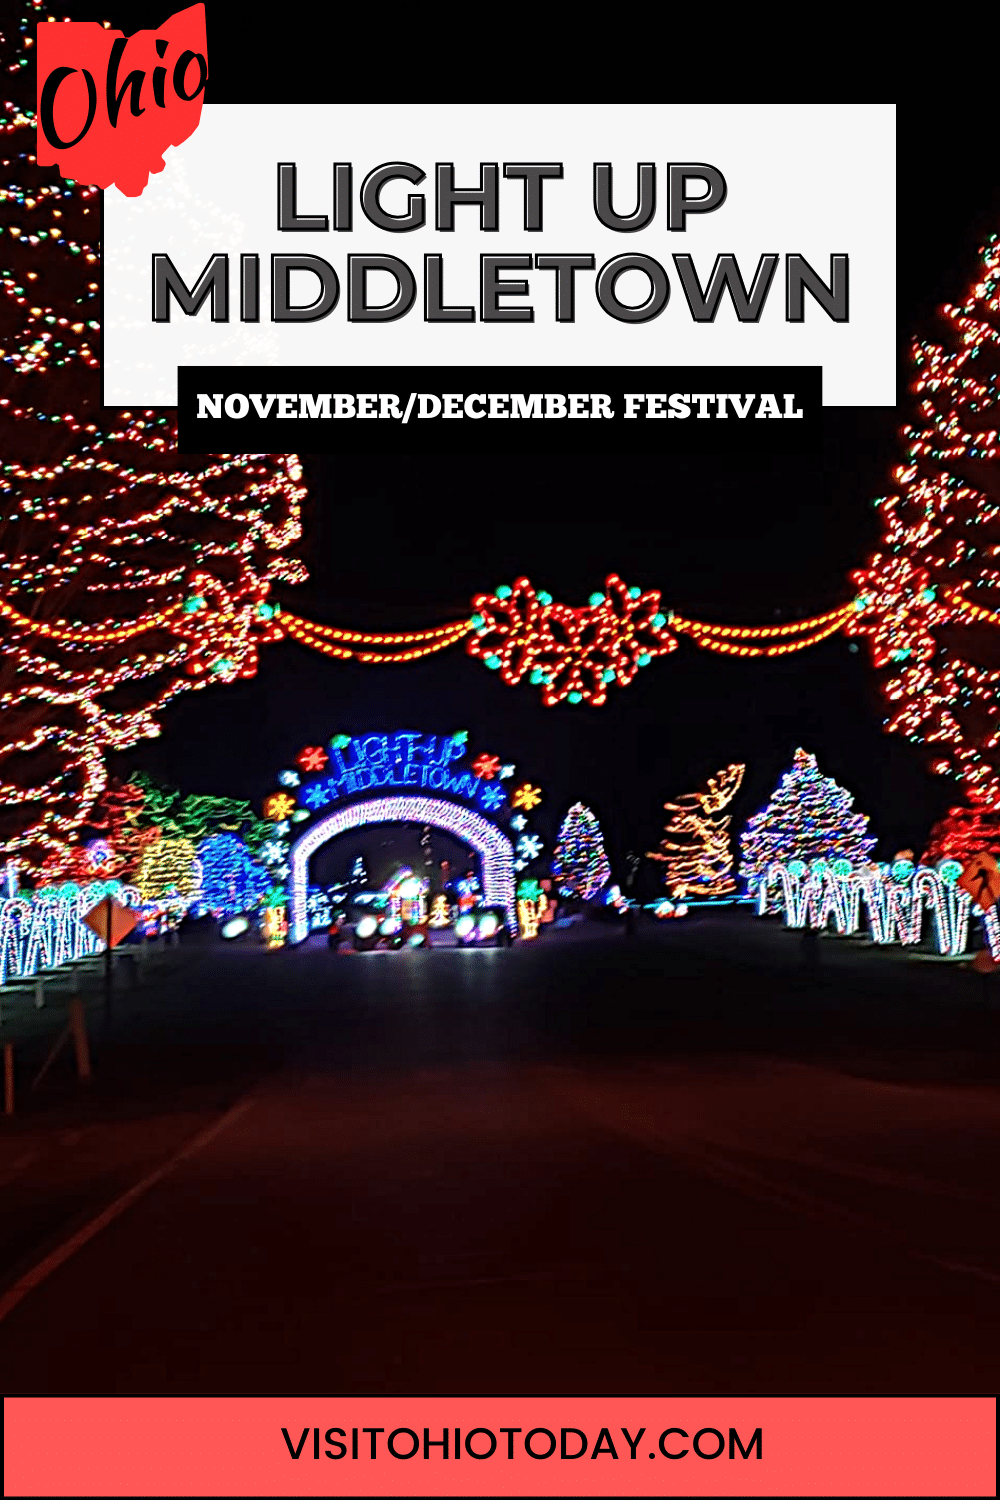 Light Up Middletown, a drive through fantasy light display, is from Thanksgiving through New Year’s Eve – November 23 to December 31, 2023